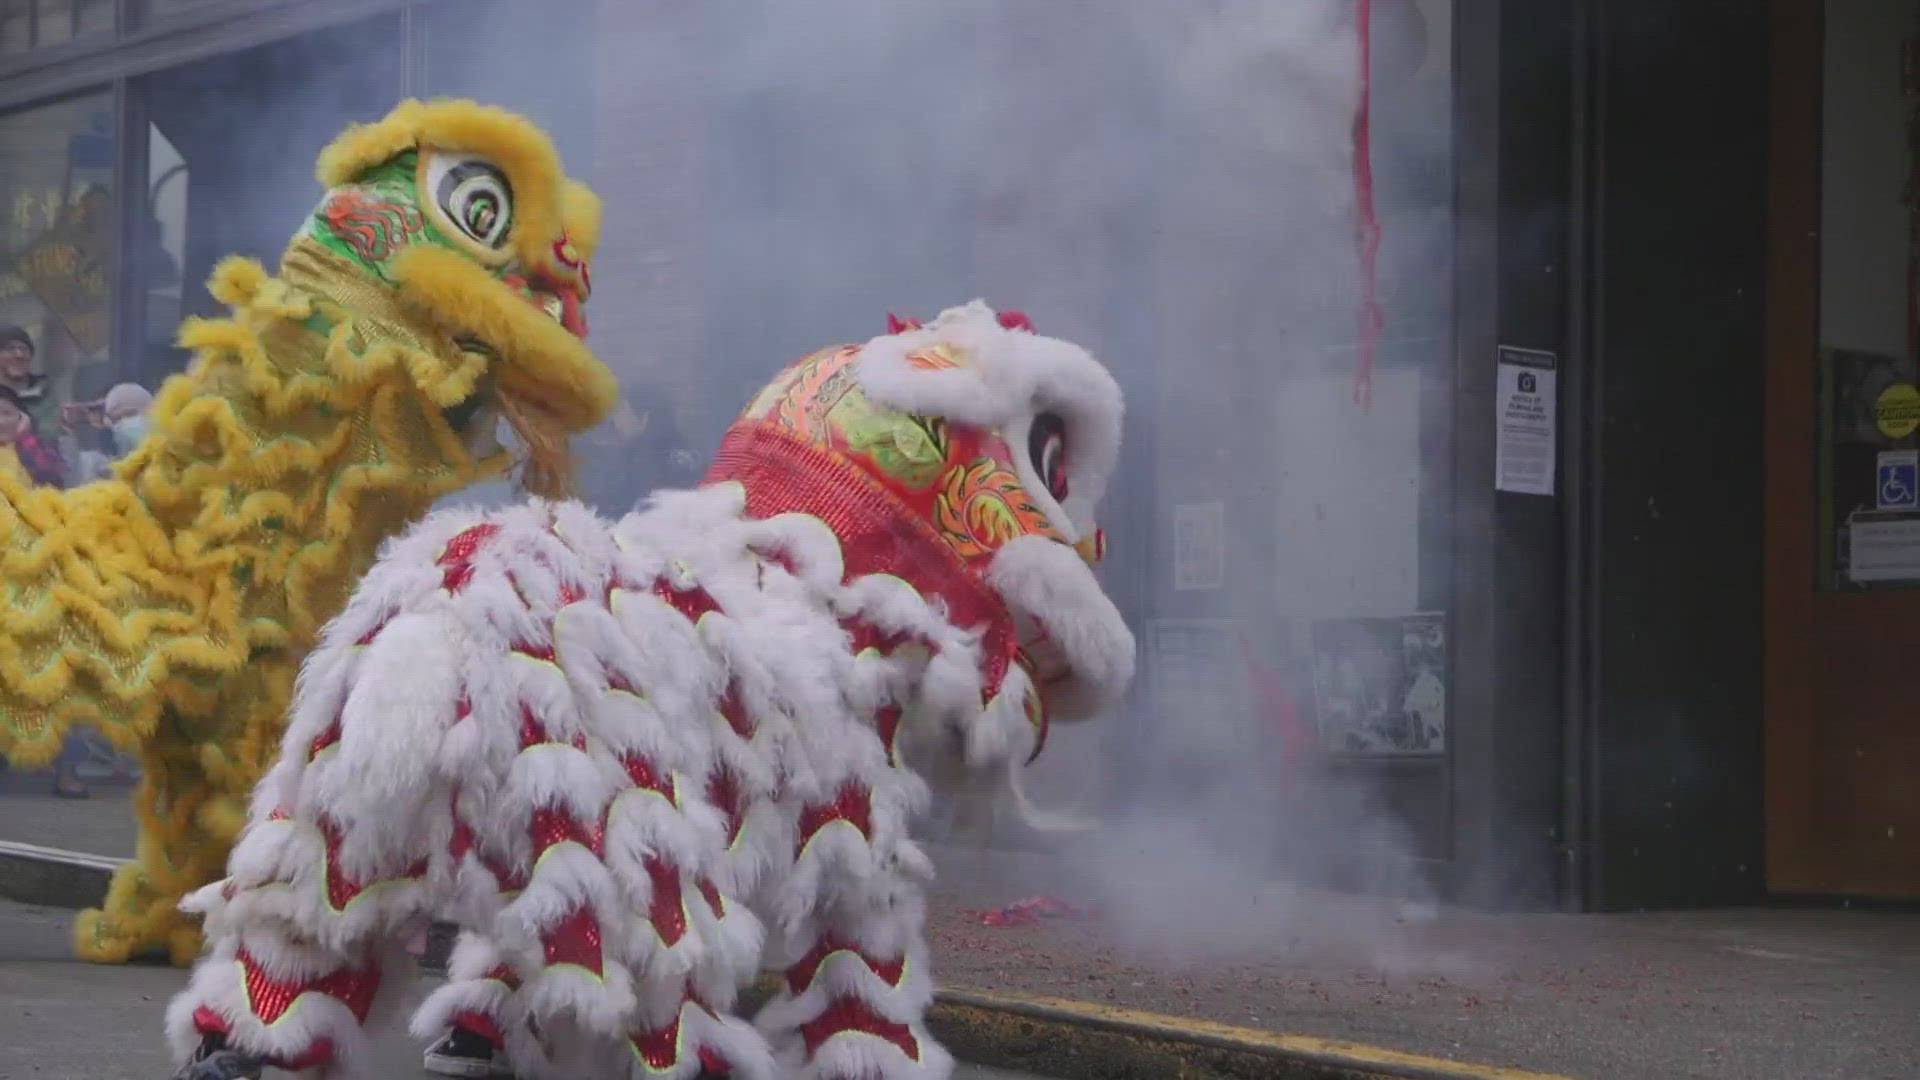 Asians represent more than 15% of the Seattle population, but the city does not officially recognize Lunar New Year.